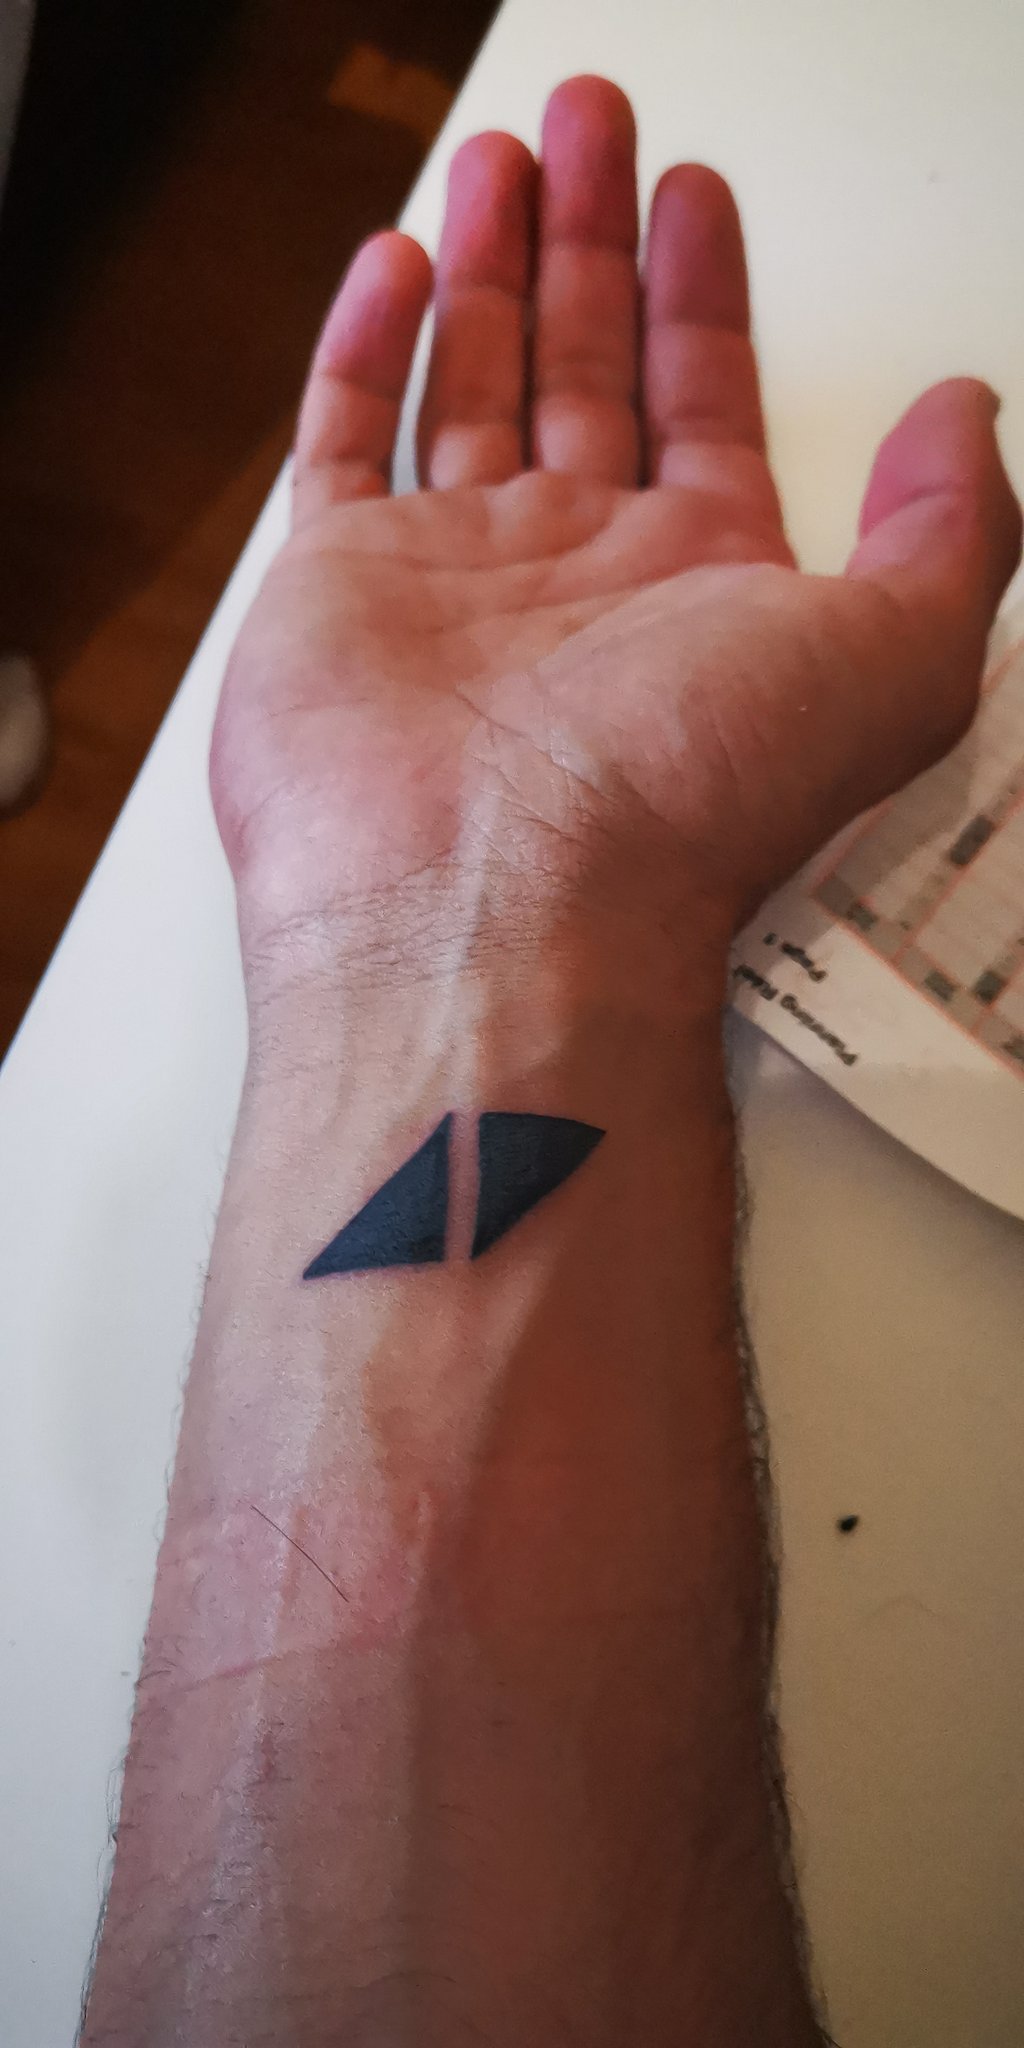 What is the meaning of the tattoo in Wake me up official by Avicii   Quora